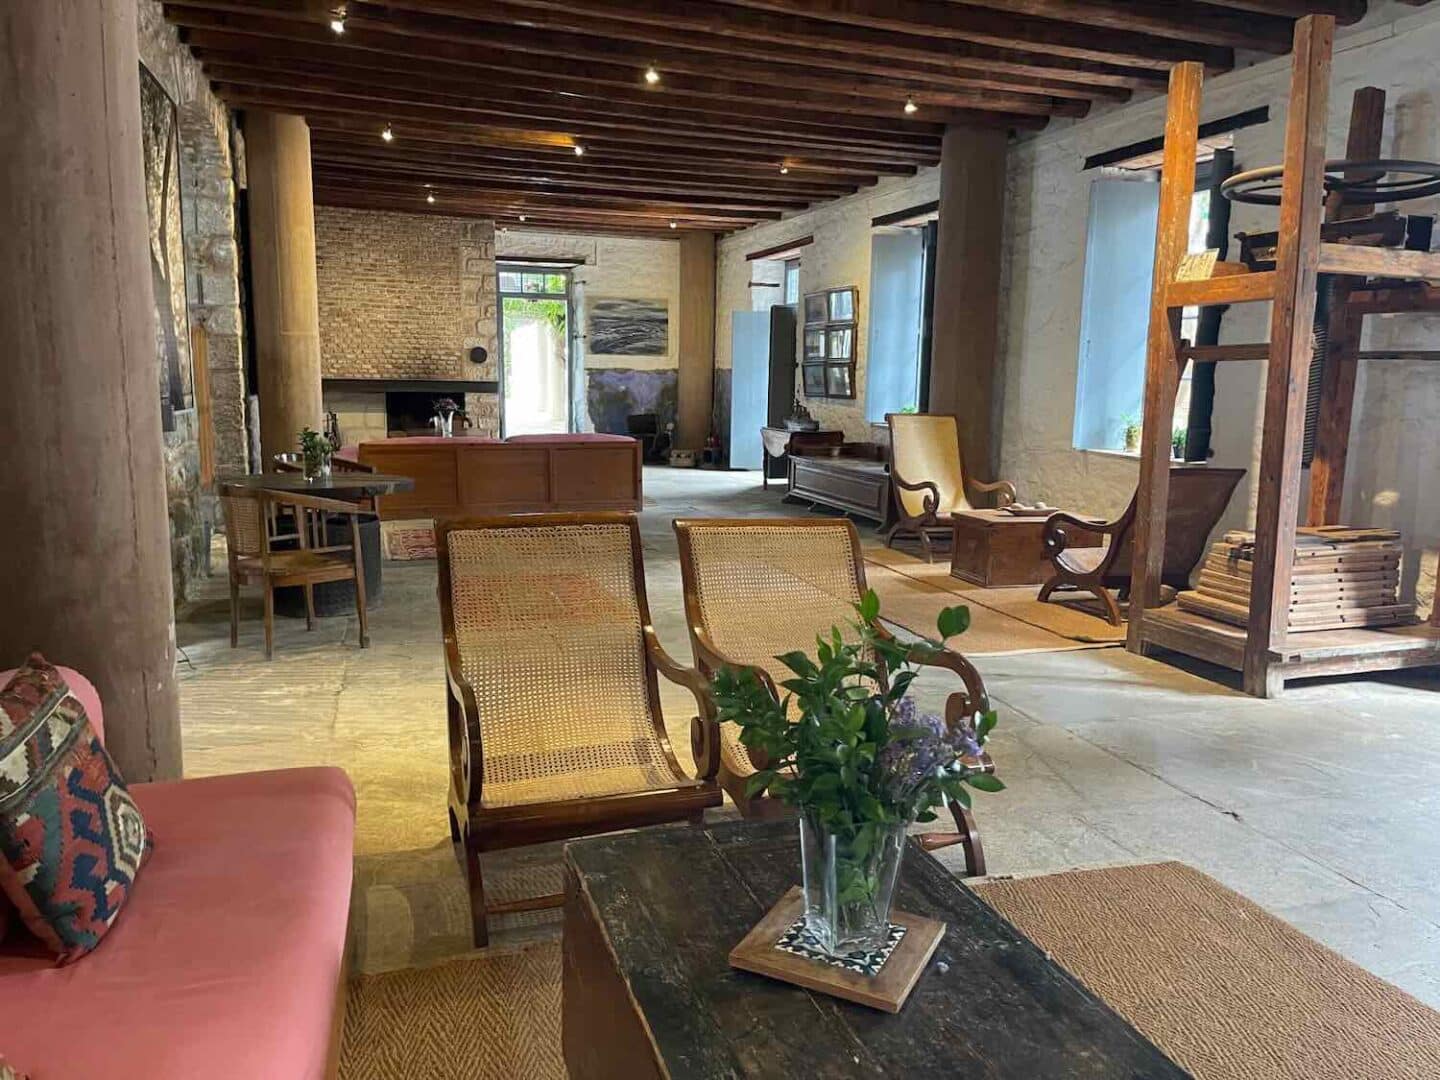 Rustic charm in a boutique hotel in Hydra, with a spacious lounge area adorned with woven chairs, a large wooden bookshelf, and a cozy fireplace.